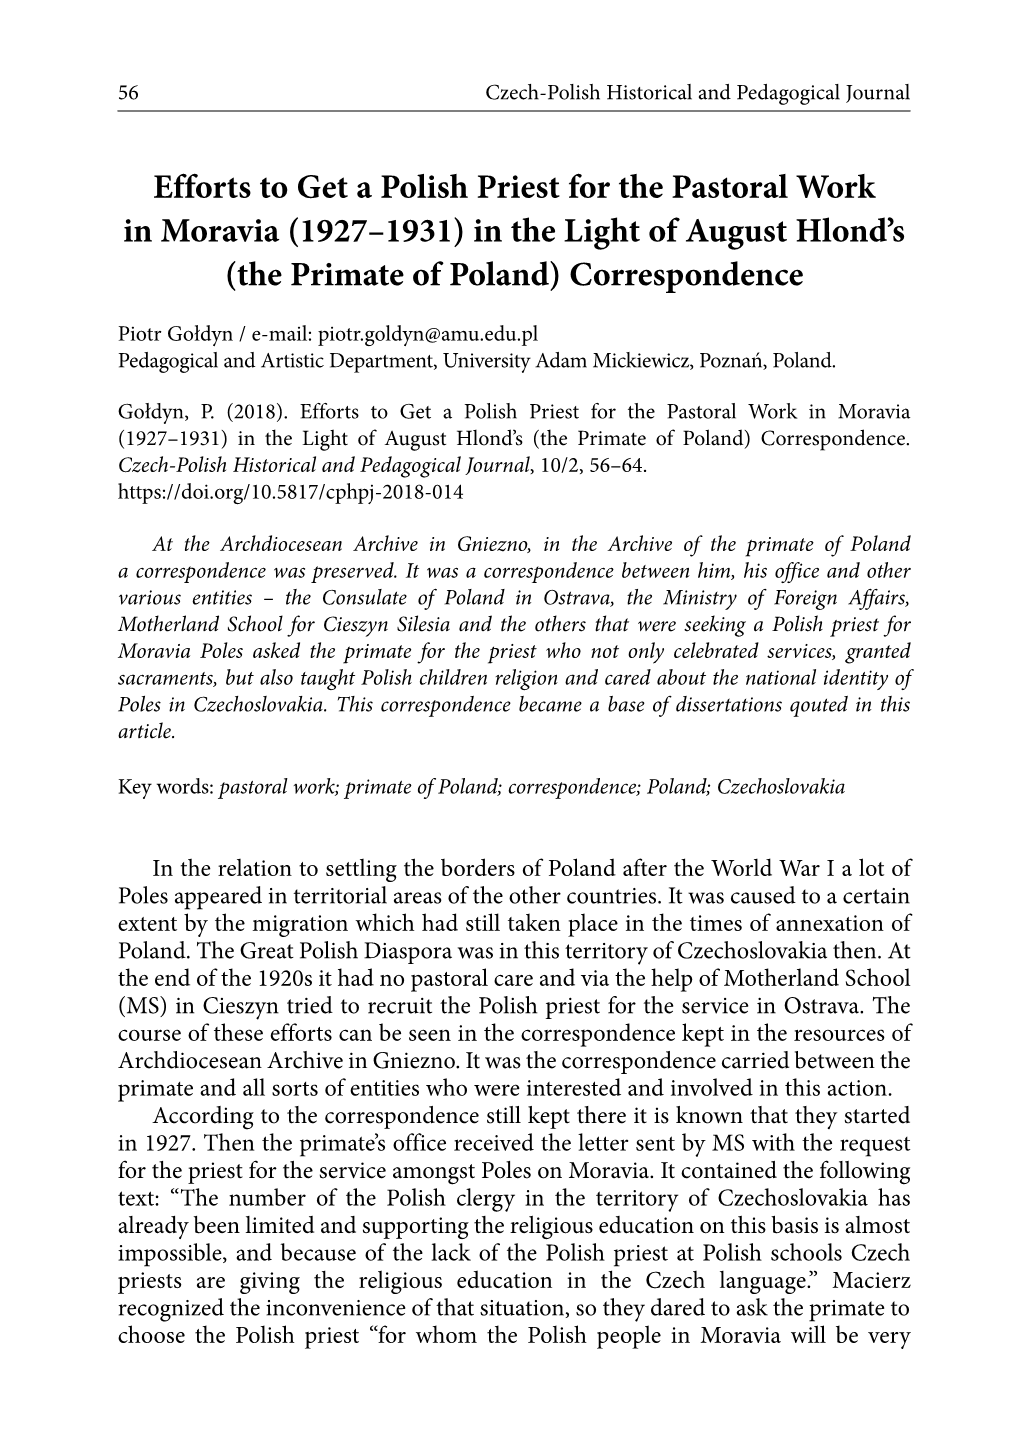 Efforts to Get a Polish Priest for the Pastoral Work in Moravia (1927–1931) in the Light of August Hlond’S (The Primate of Poland) Correspondence